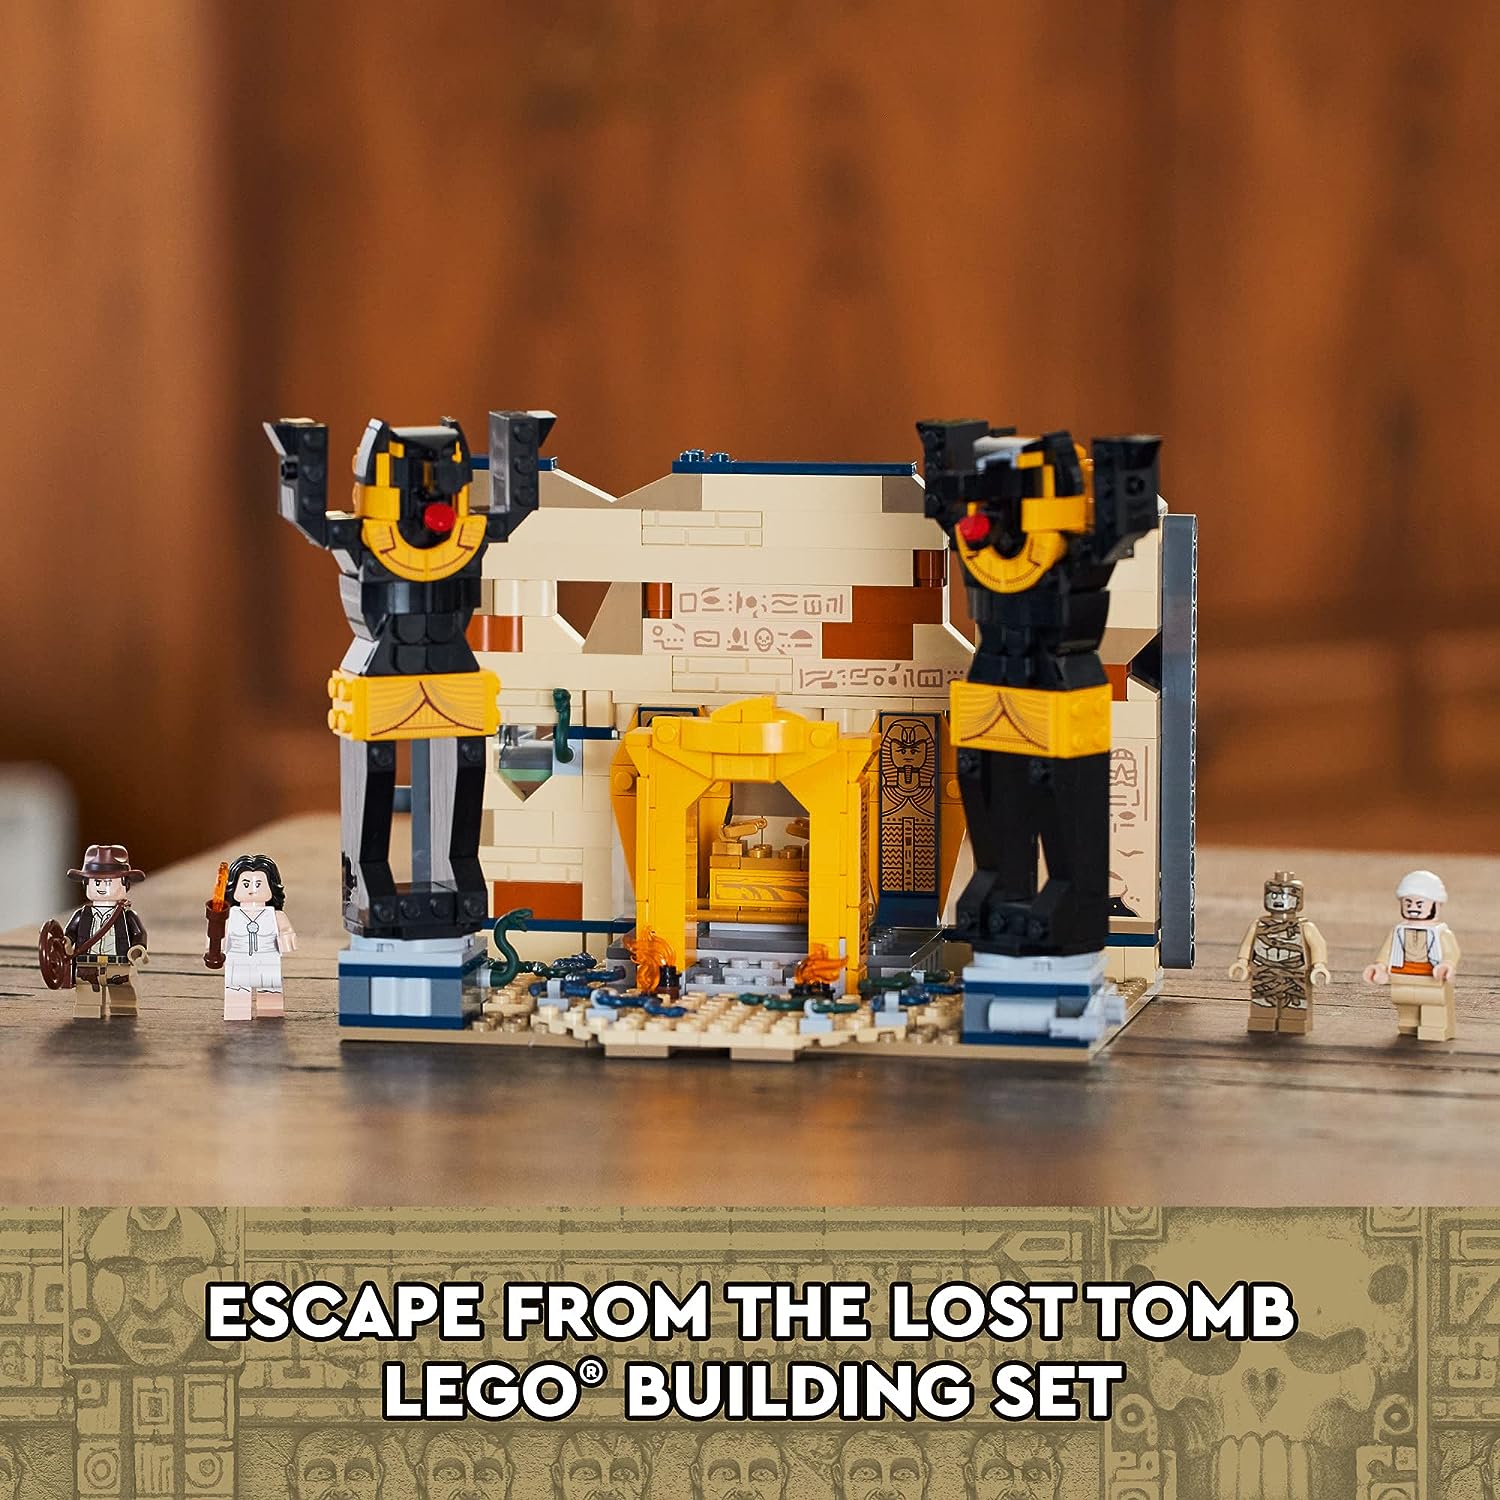 LEGO Indiana Jones Escape from The Lost Tomb 77013 Building Toy, Featuring a Mummy and an Indiana Jones Minifigure from Raiders of The Lost Ark Movie